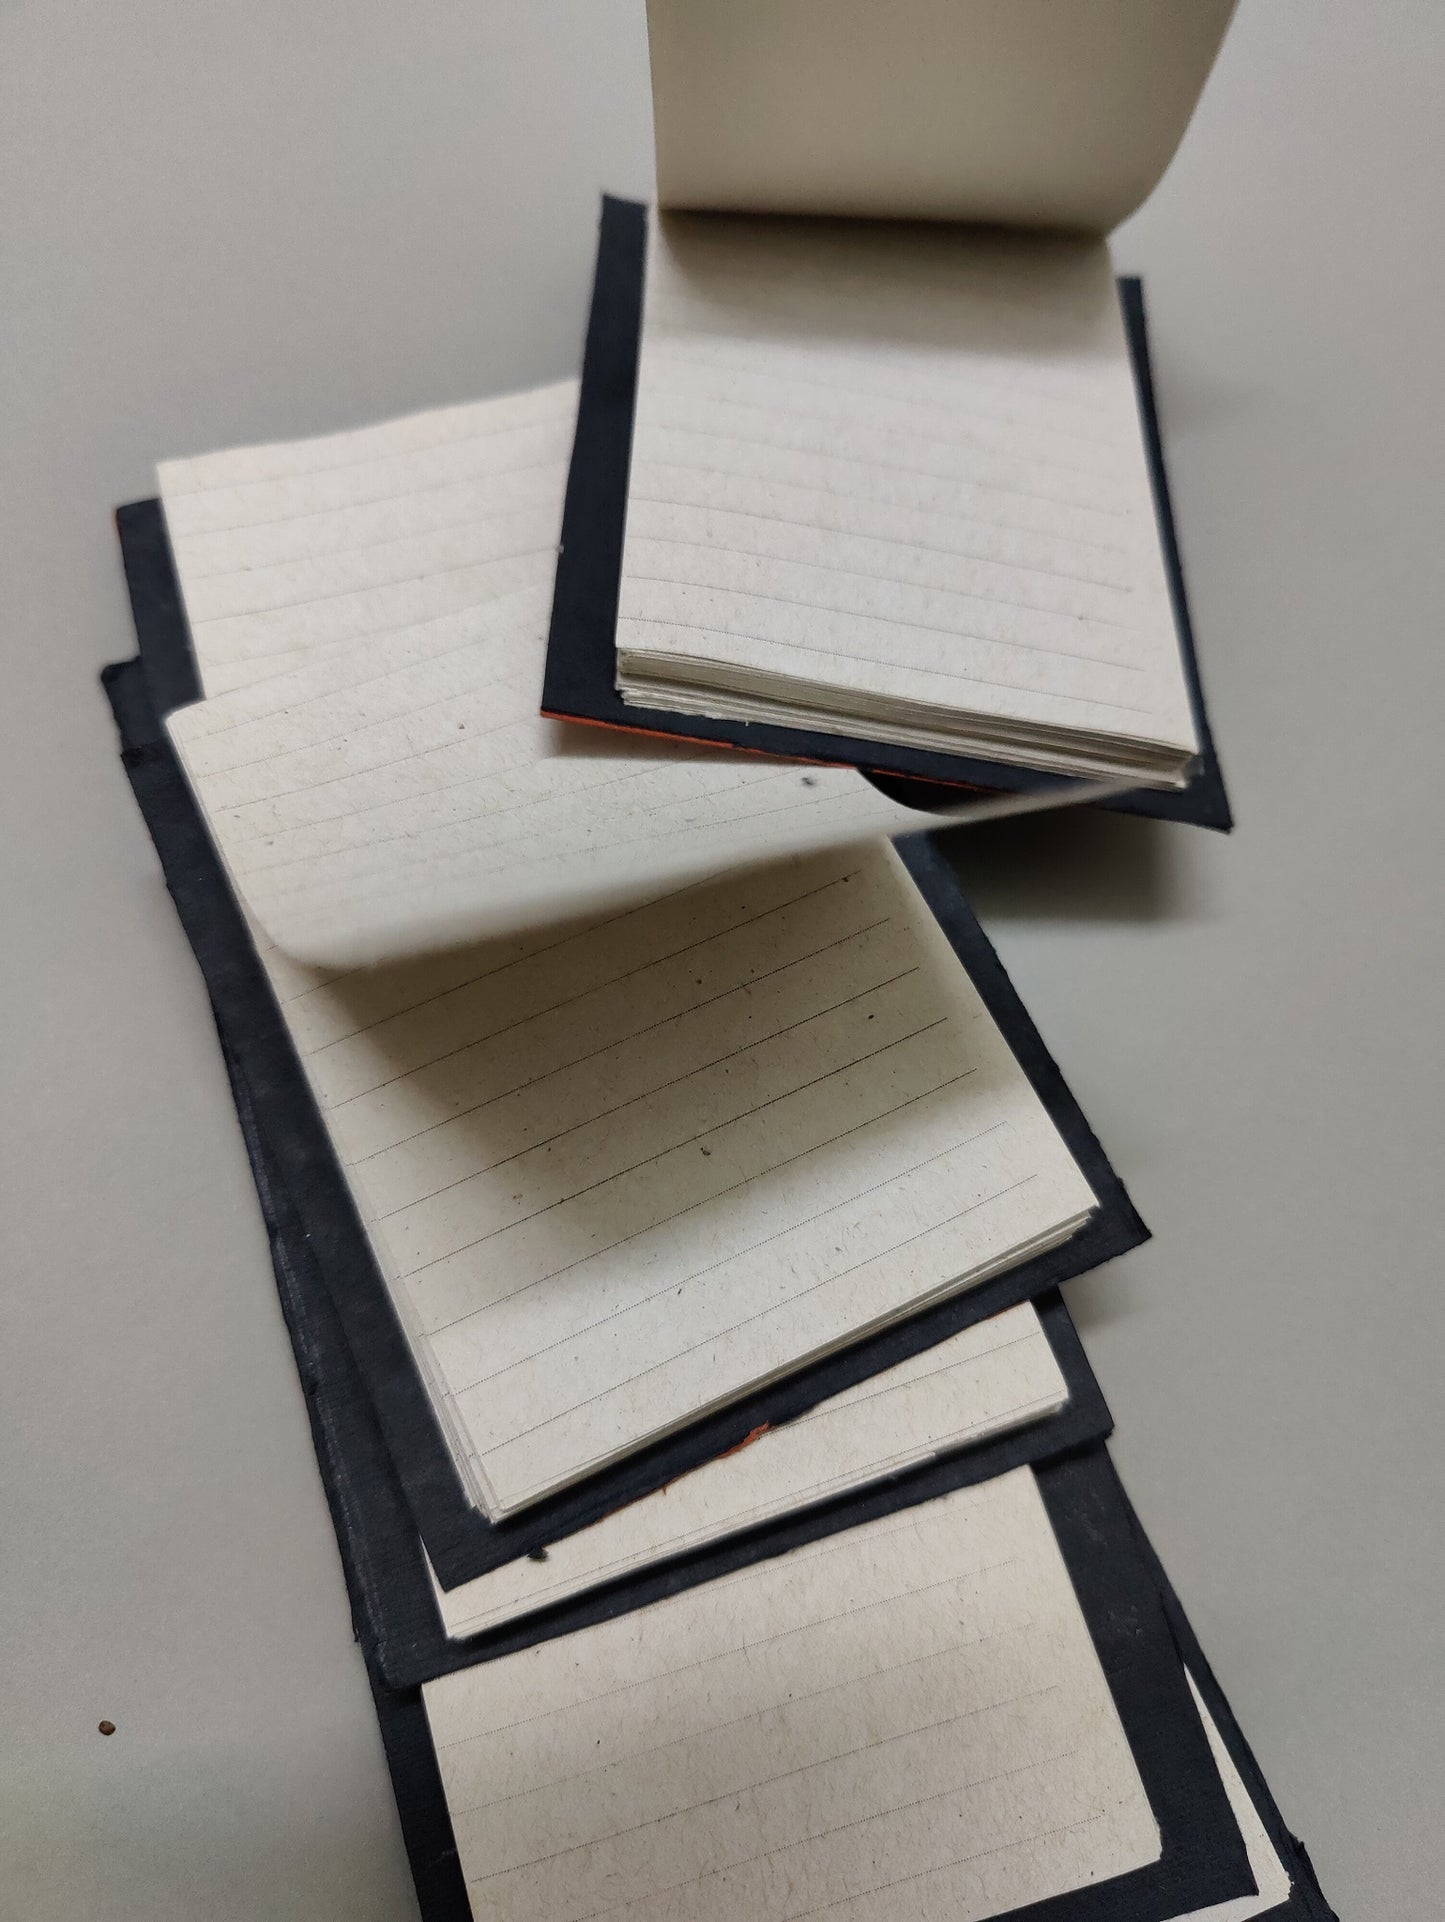 Pack of 4 - Unbleached recycled notepad